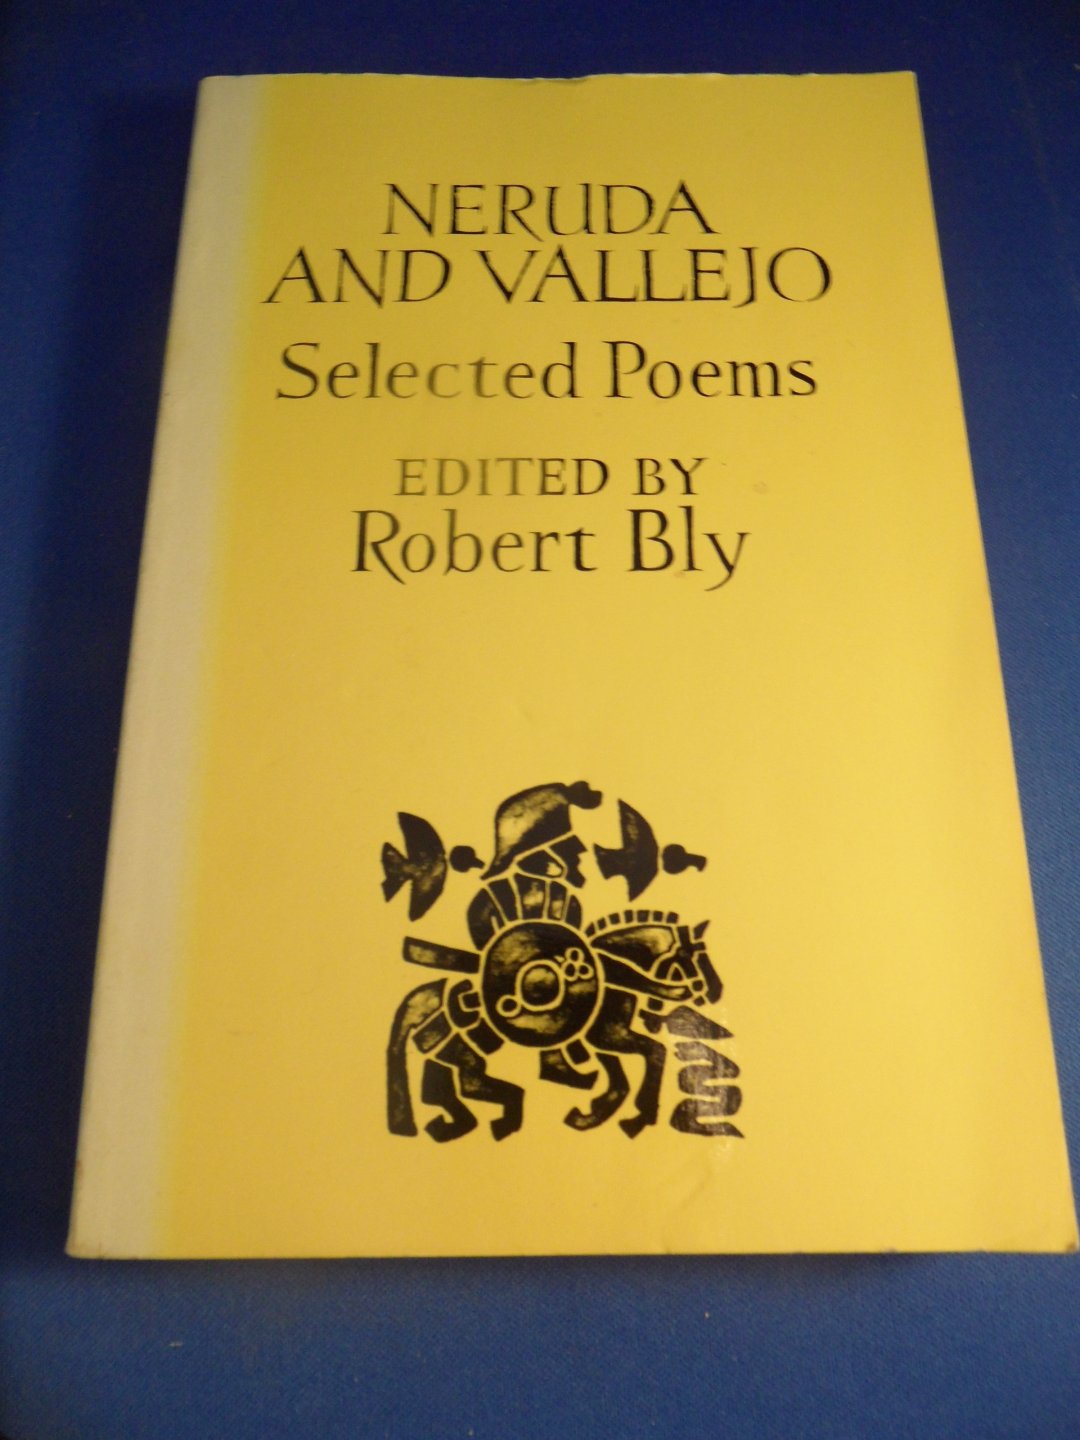 Neruda, Pablo & Vallejo, César - Selected poems. Edited by Robert Bly